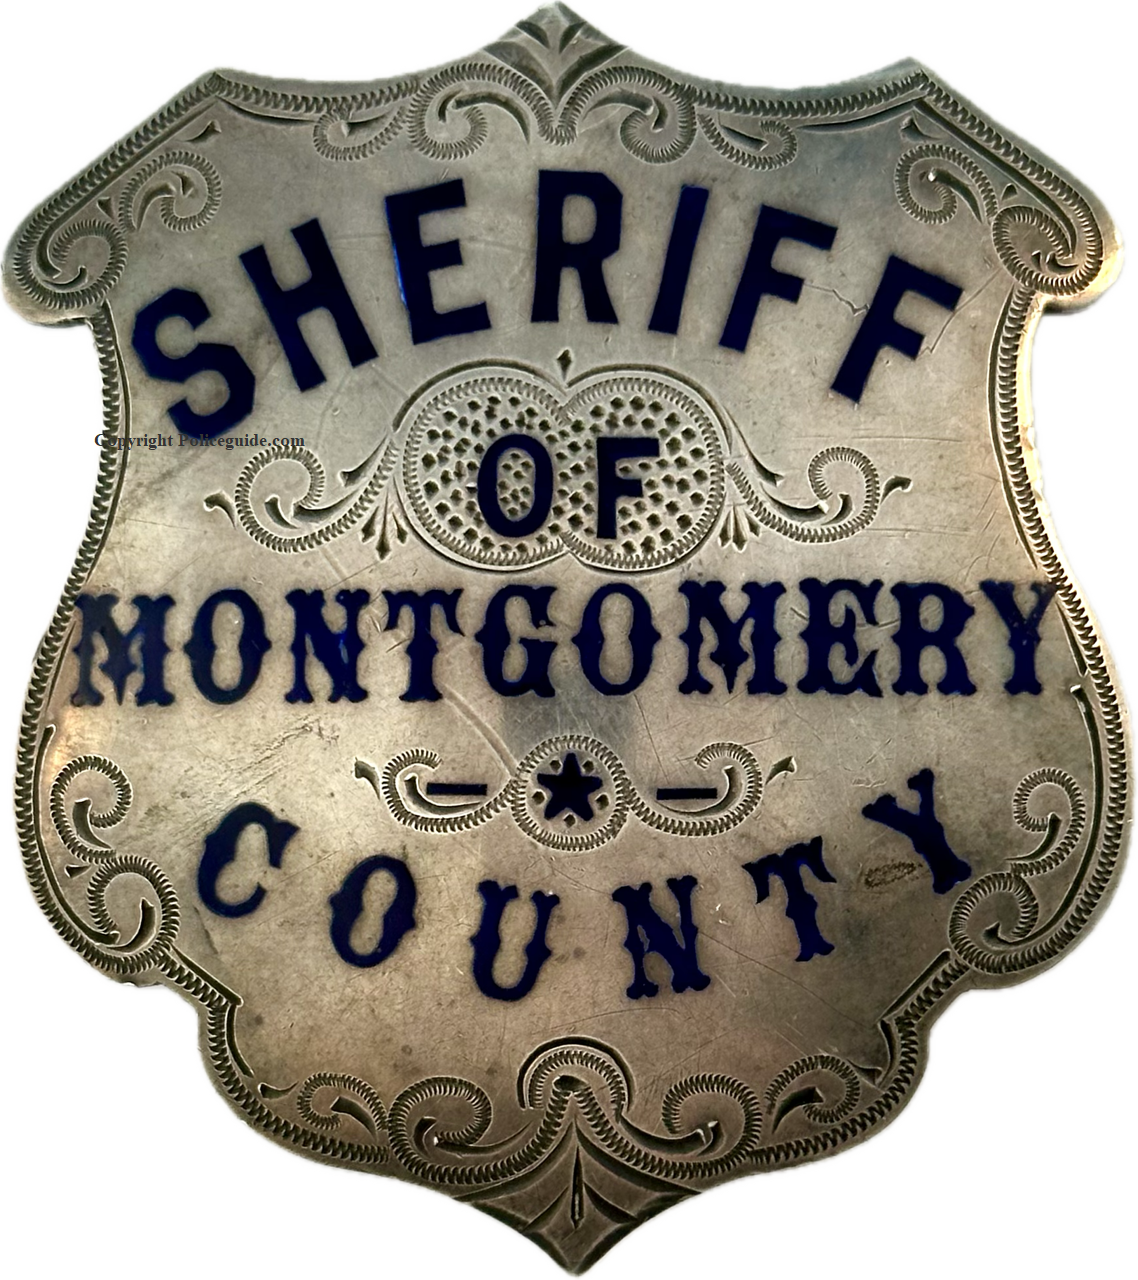 Sheriff Montgomery Co. MO shield of J. T. Hunt.  Back of badge the presentation reads:  From M.R.C. to J.T. Hunt., made by Wirth & Jachens S. F. circa 1900.